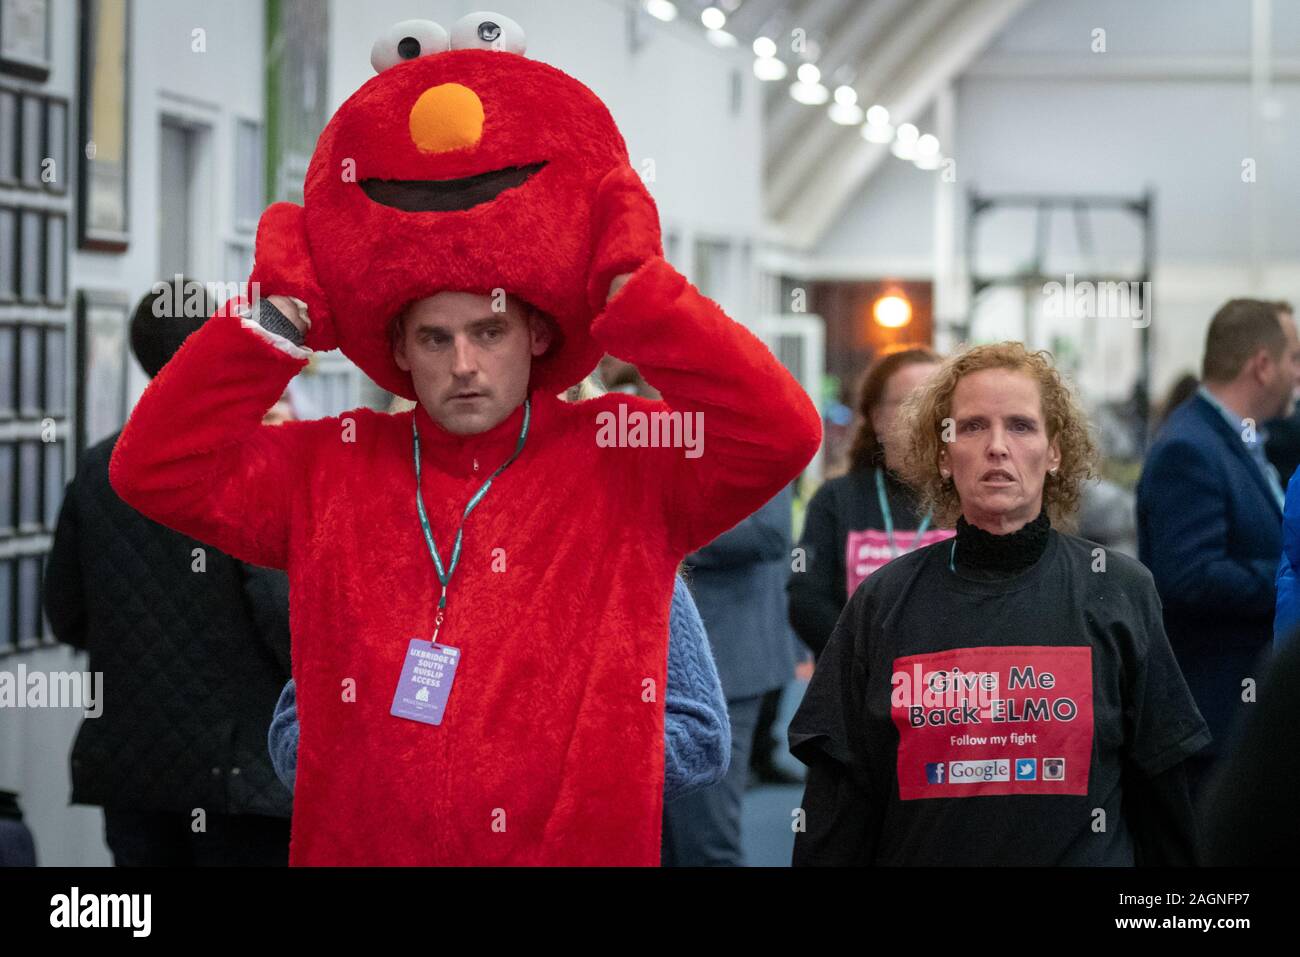 Elmo bobby smith hi-res stock photography and images - Alamy